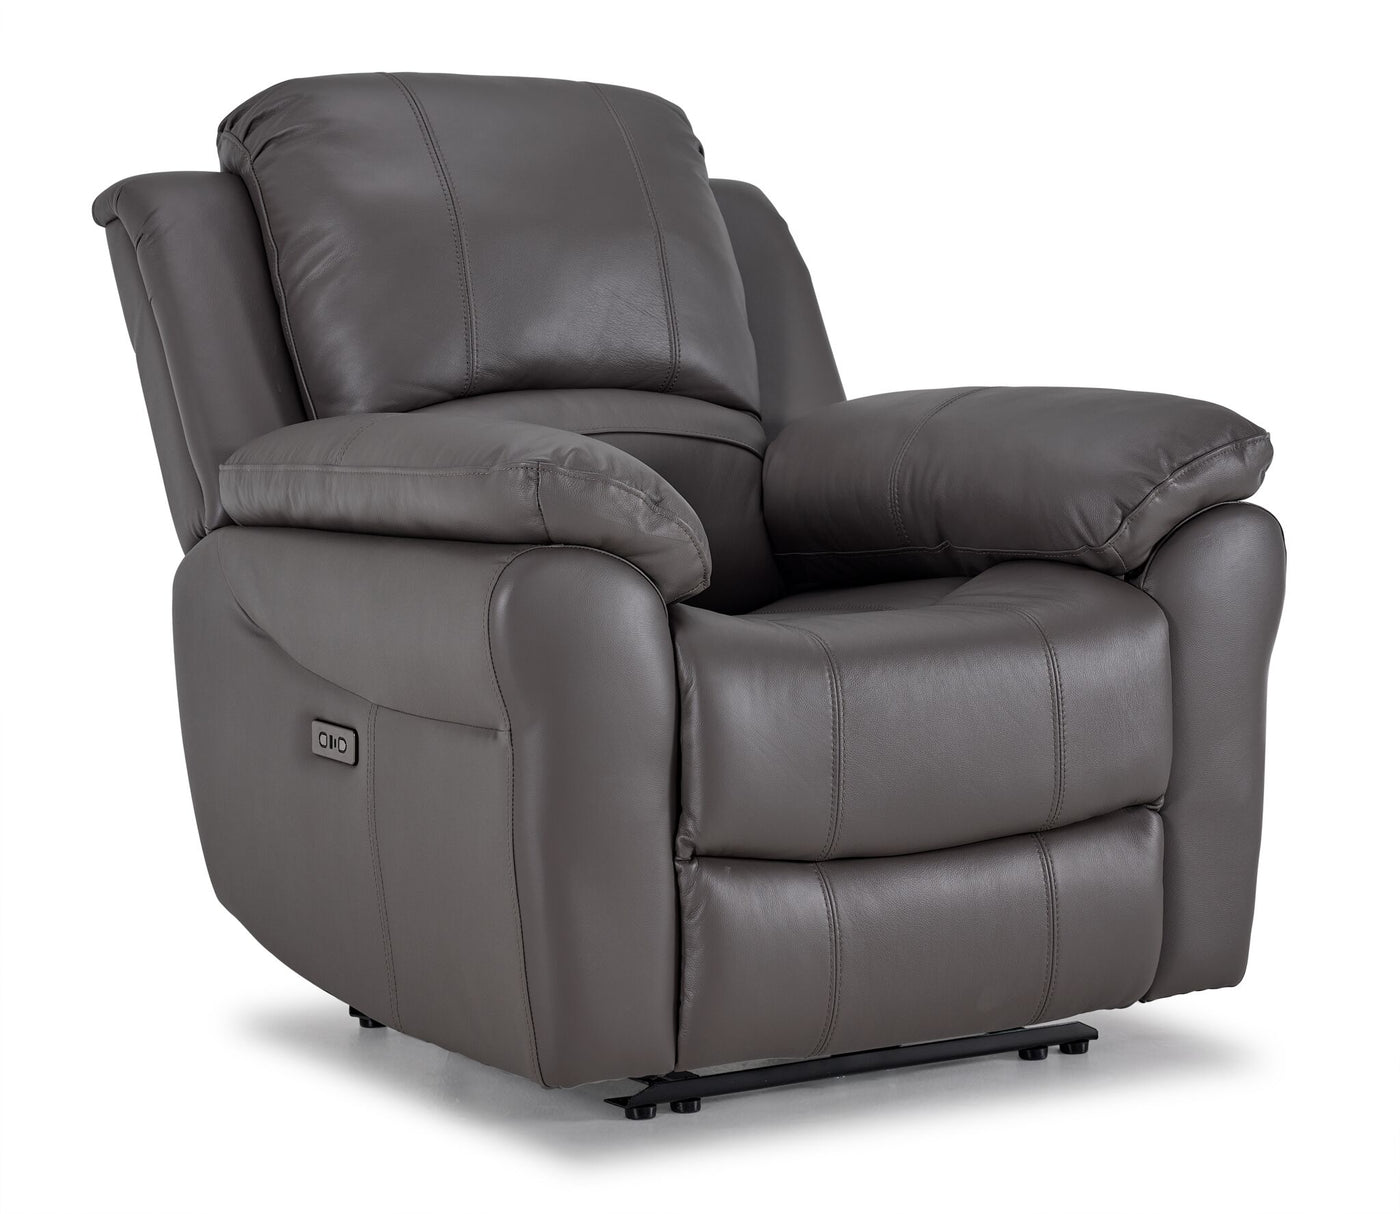 Alba Leather Dual Power Reclining Sofa and Chair Set - Grey